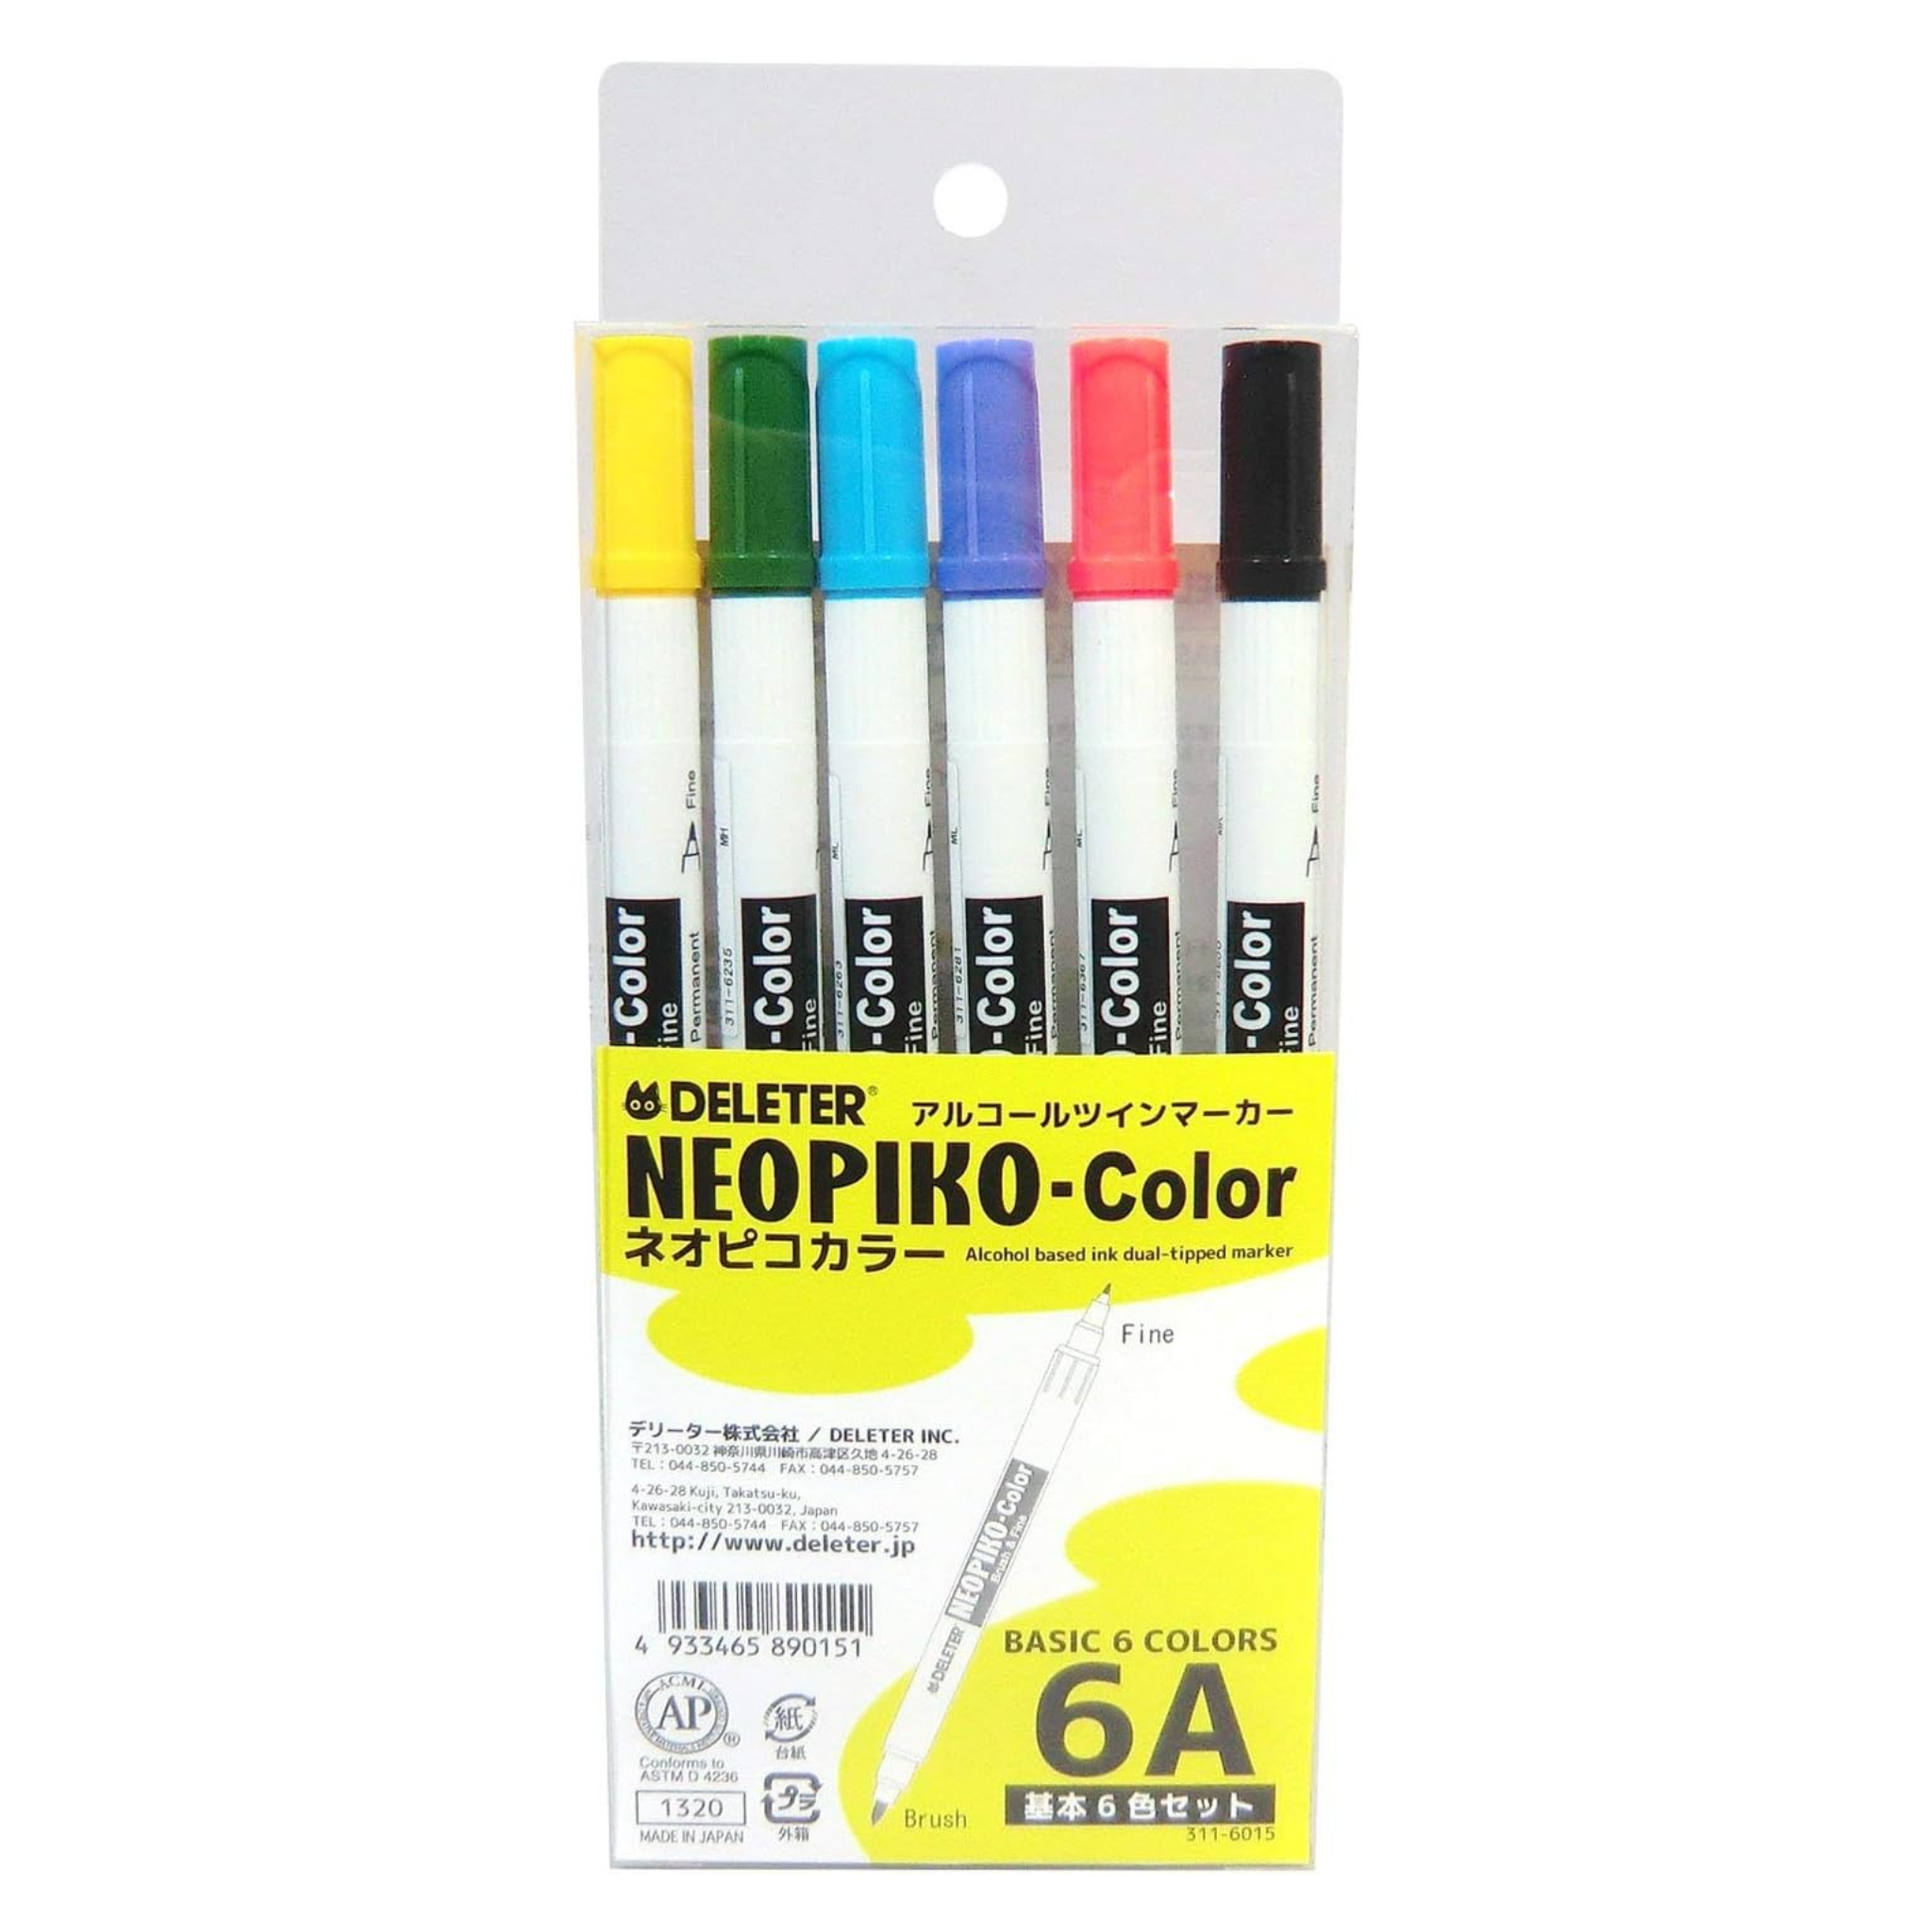 DELETER Neopiko Color, Basic 6 colors set